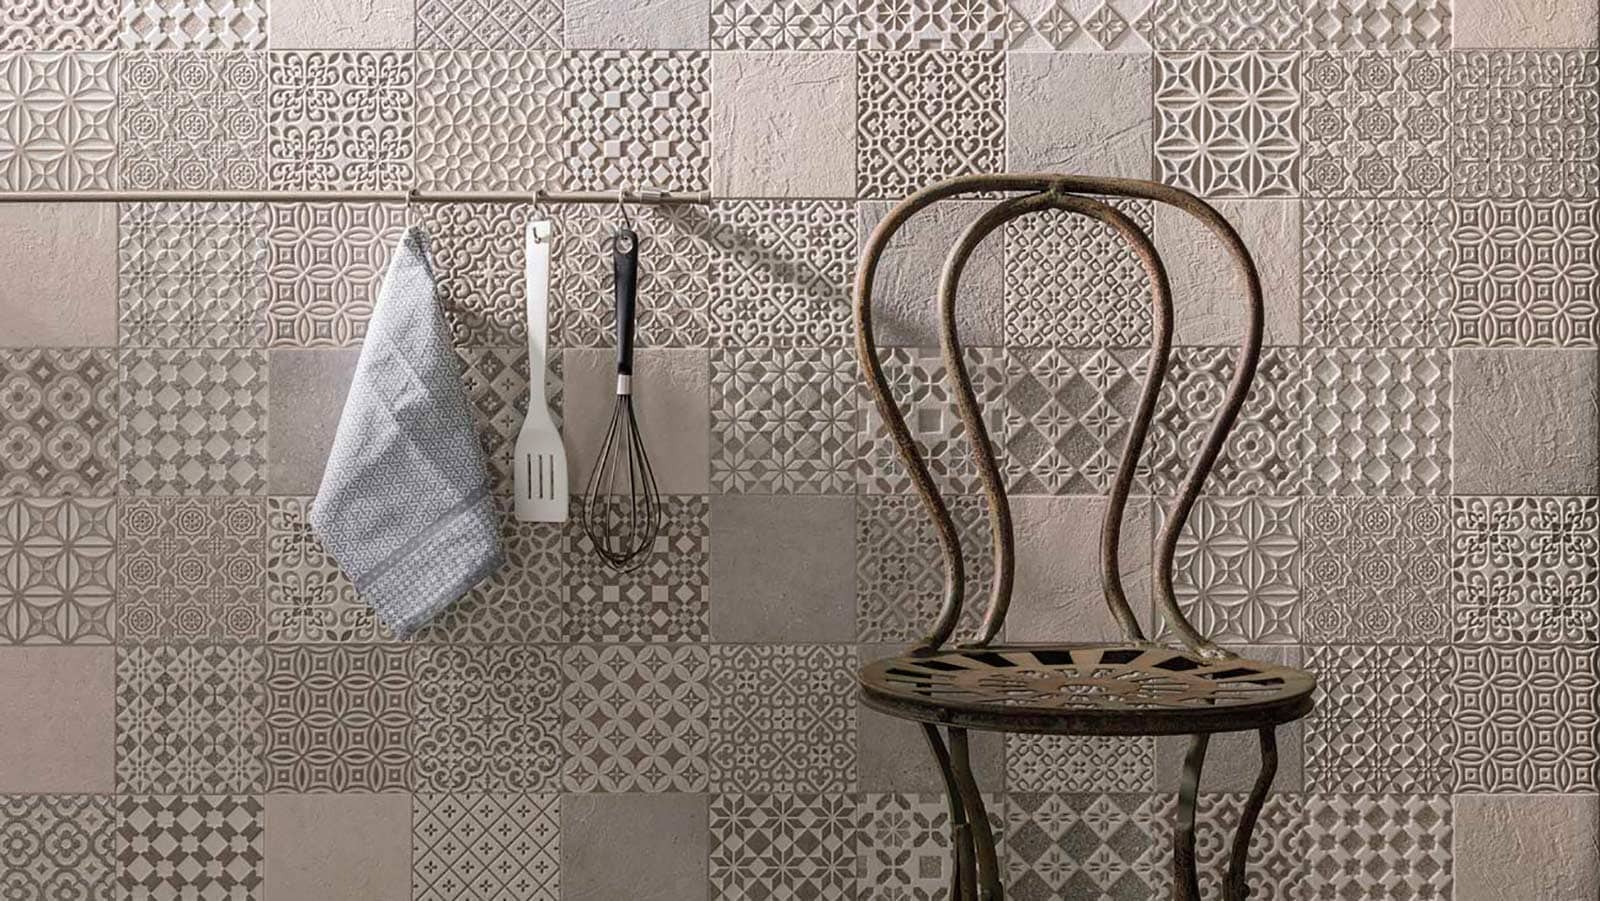 Porcelanosa brings the charm of hydraulic tiles back